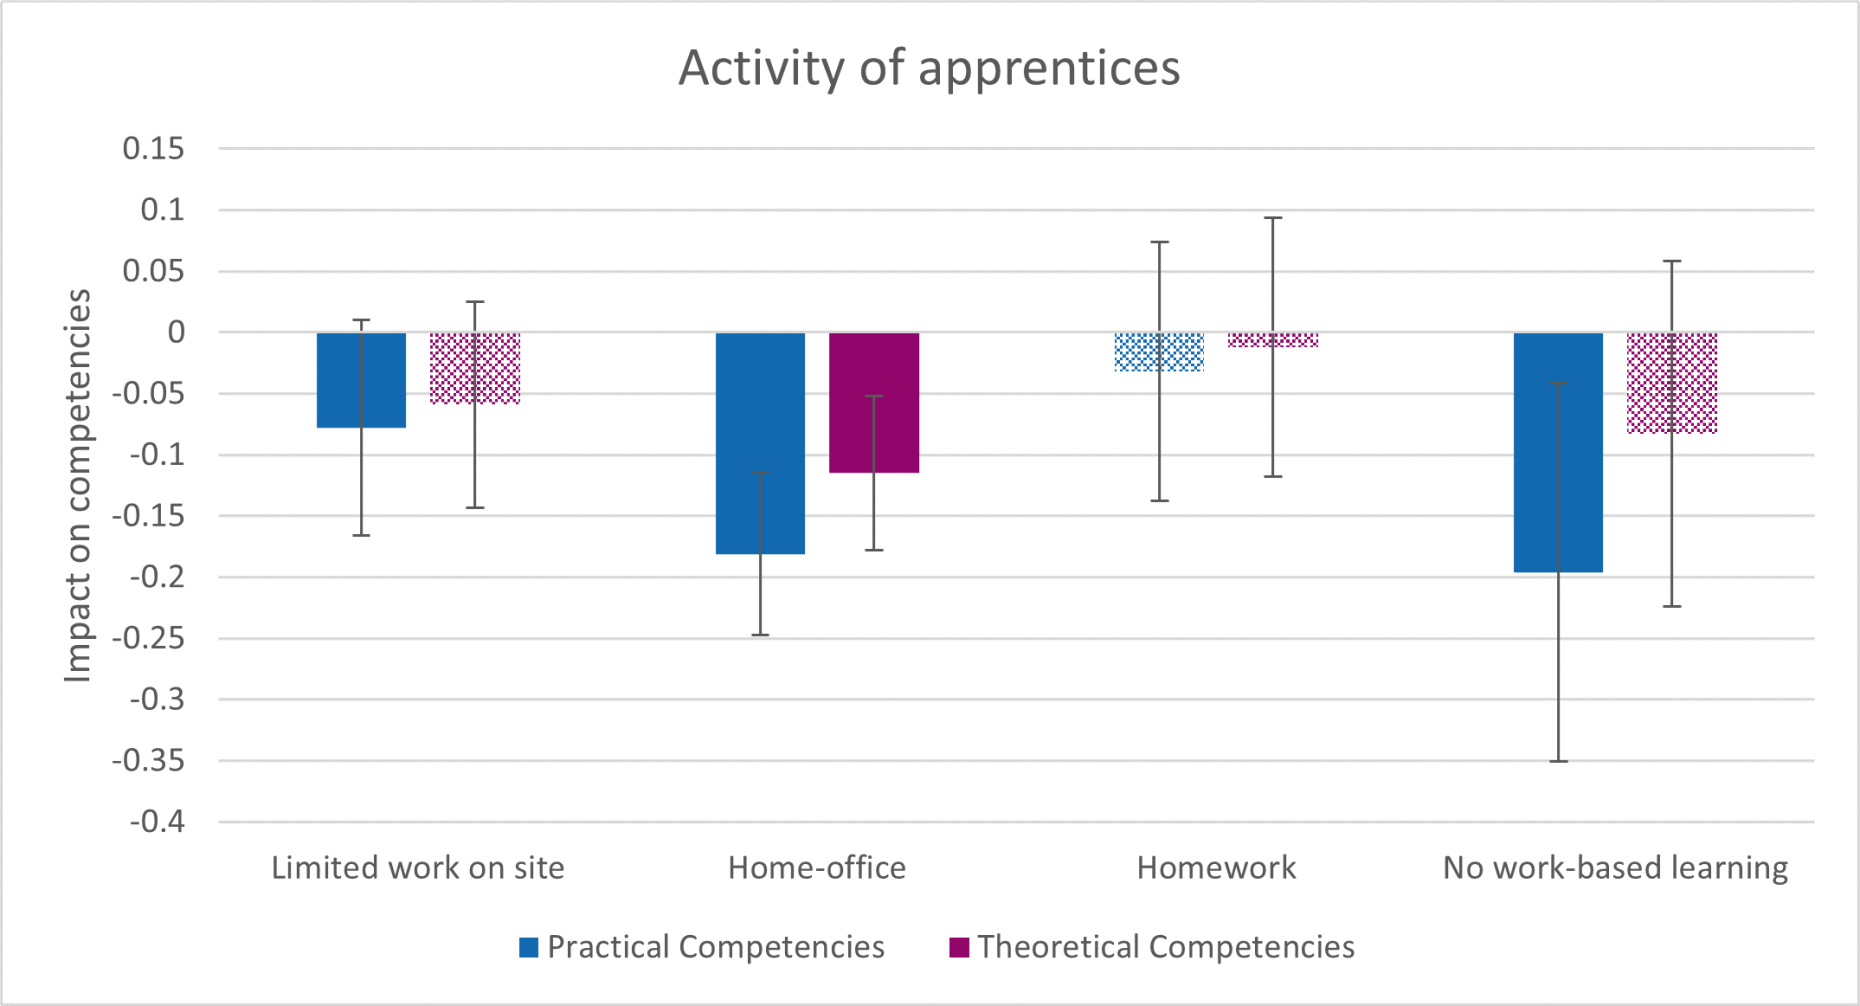 Enlarged view: Figure 2: Impact of the activity of apprentices on their practical and theoretical competencies